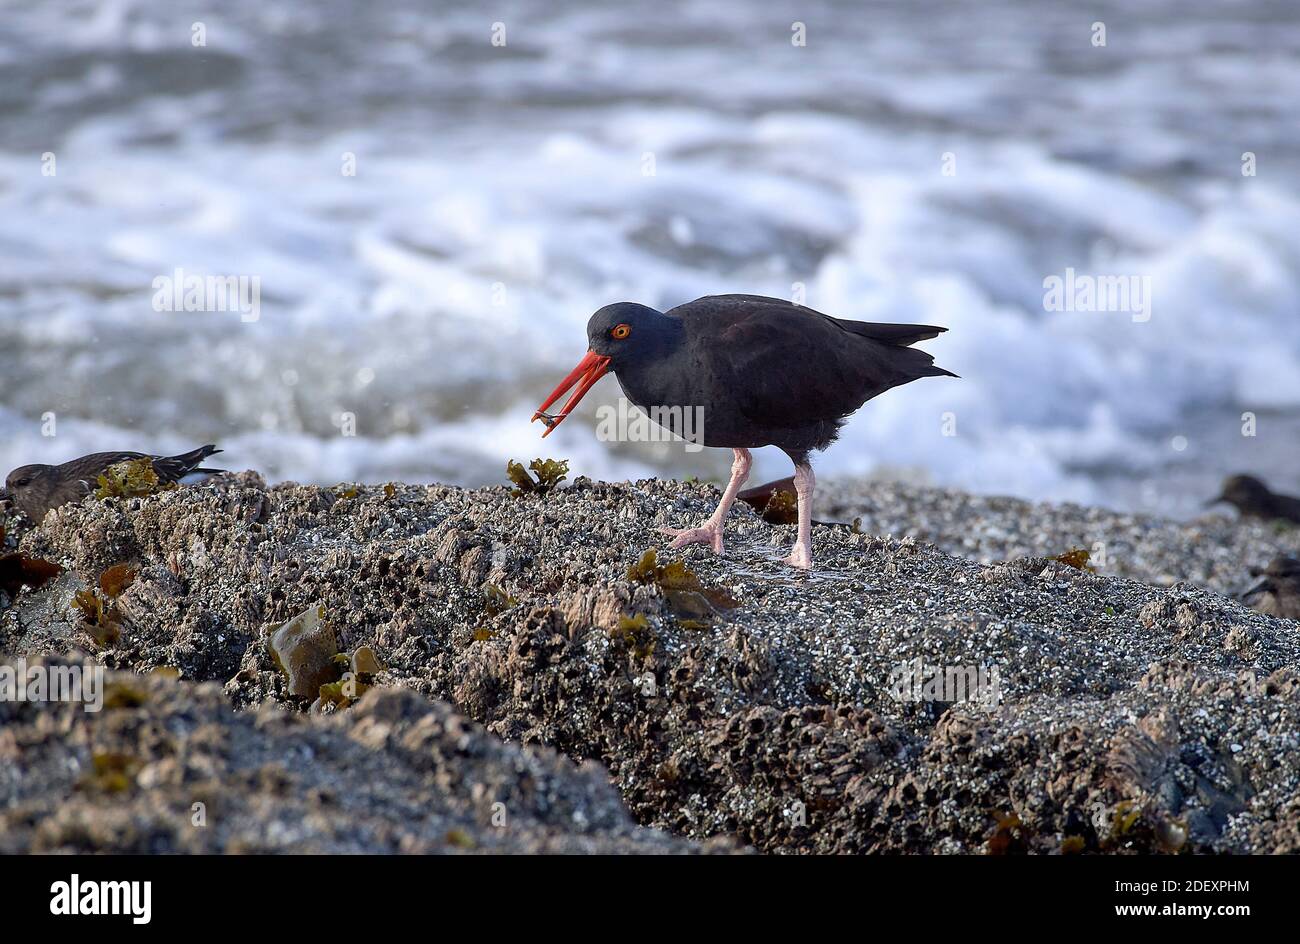 A Black oystercatcher (Haematopus bachmani) feeds at Coquille Point, part of the Oregon Islands National Wildlife Refuge near Bandon, Oregon, USA. Stock Photo